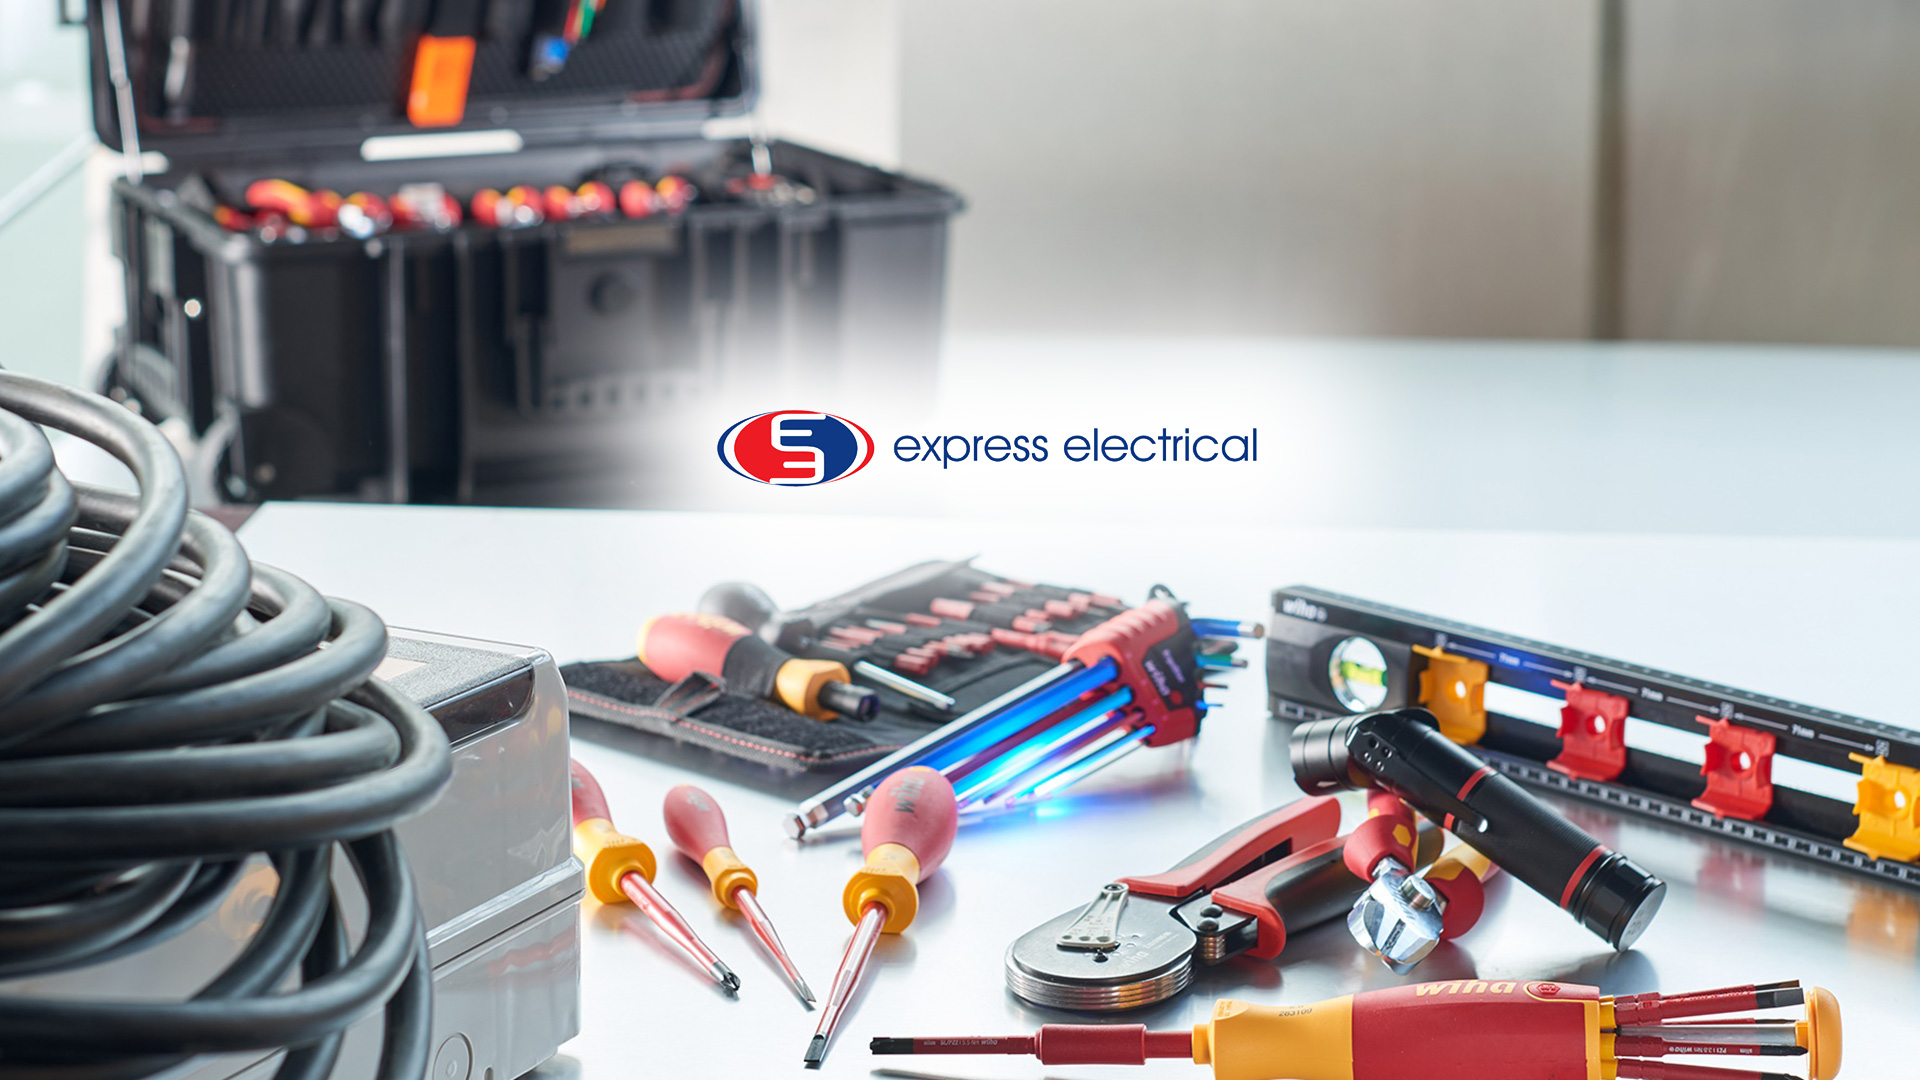 Express Electrical banner